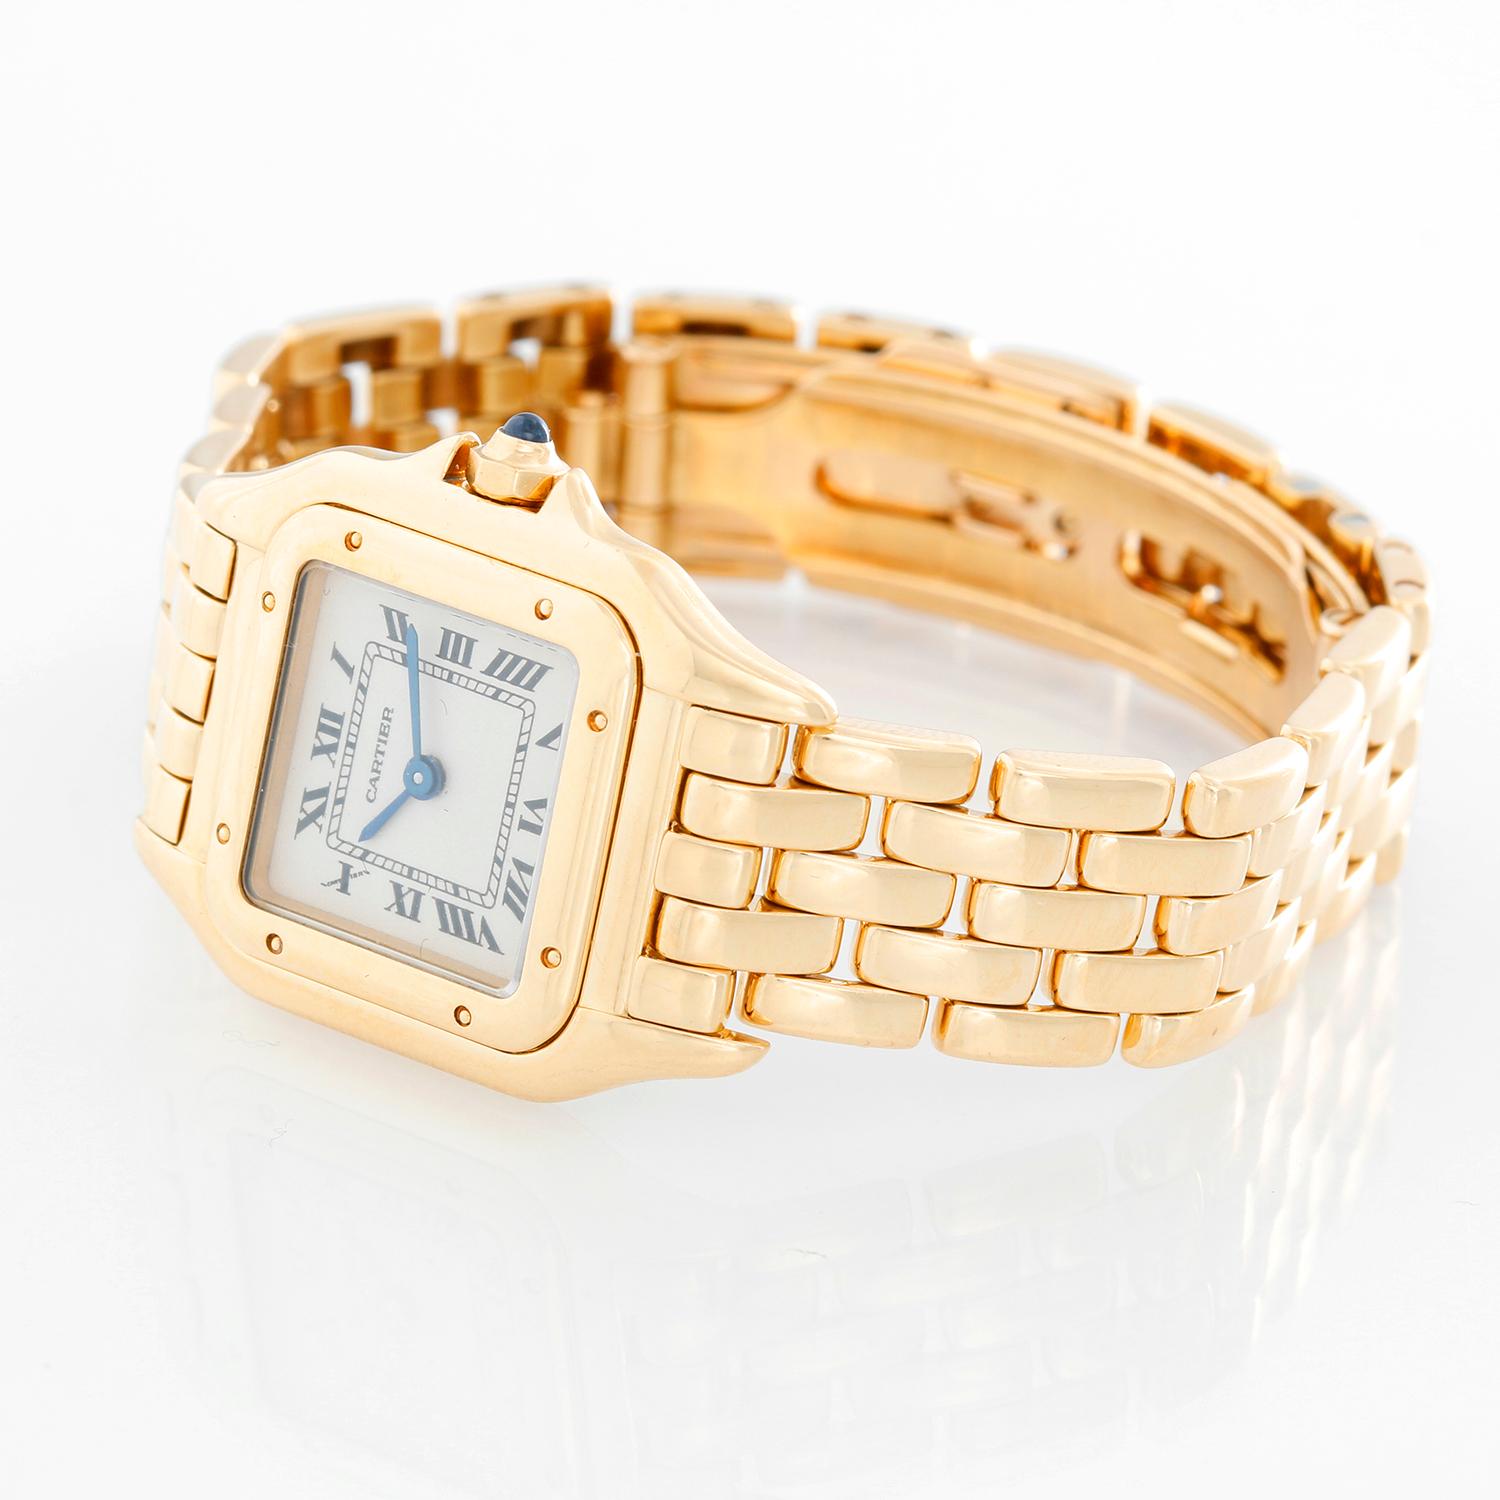 Cartier Panther Ladies 18k Yellow Gold Panthere Watch W25022B9 - Quartz. 18k yellow gold case (21mm x 30mm). Ivory colored dial with black Roman numerals. 18k yellow gold Panther bracelet. Pre-owned with custom box .